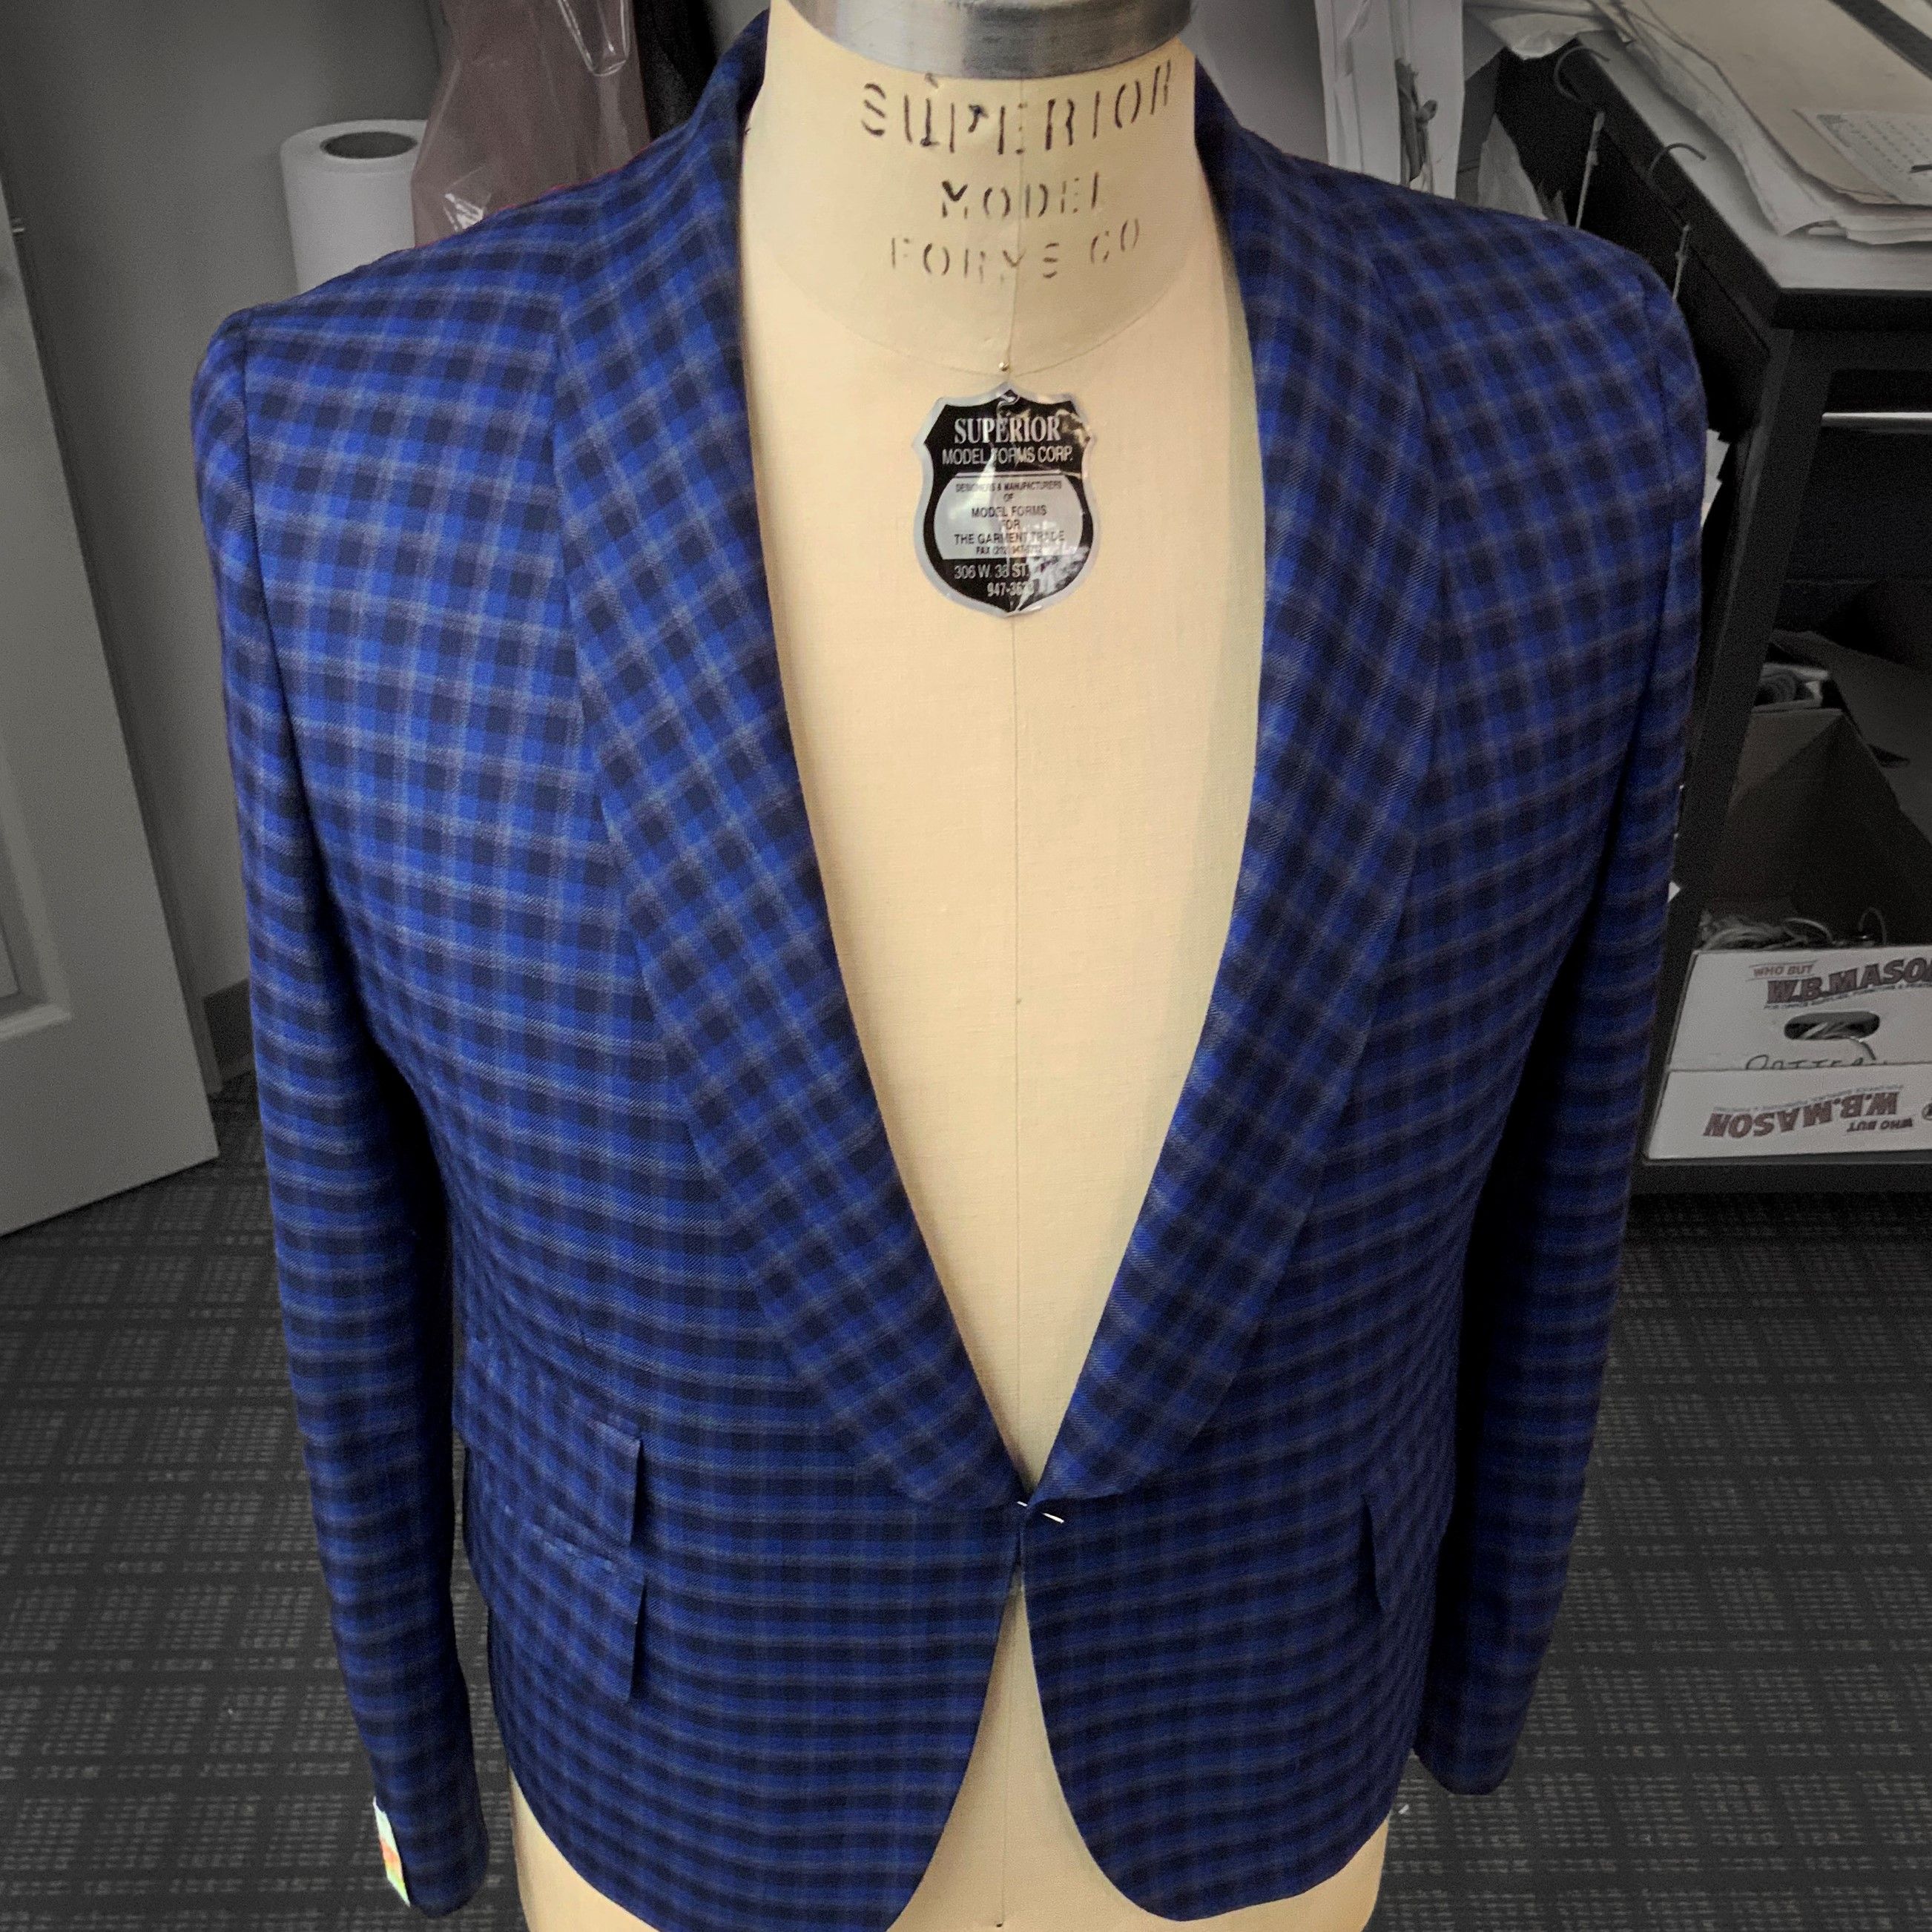 A mannequin displaying a blue suit jacket.